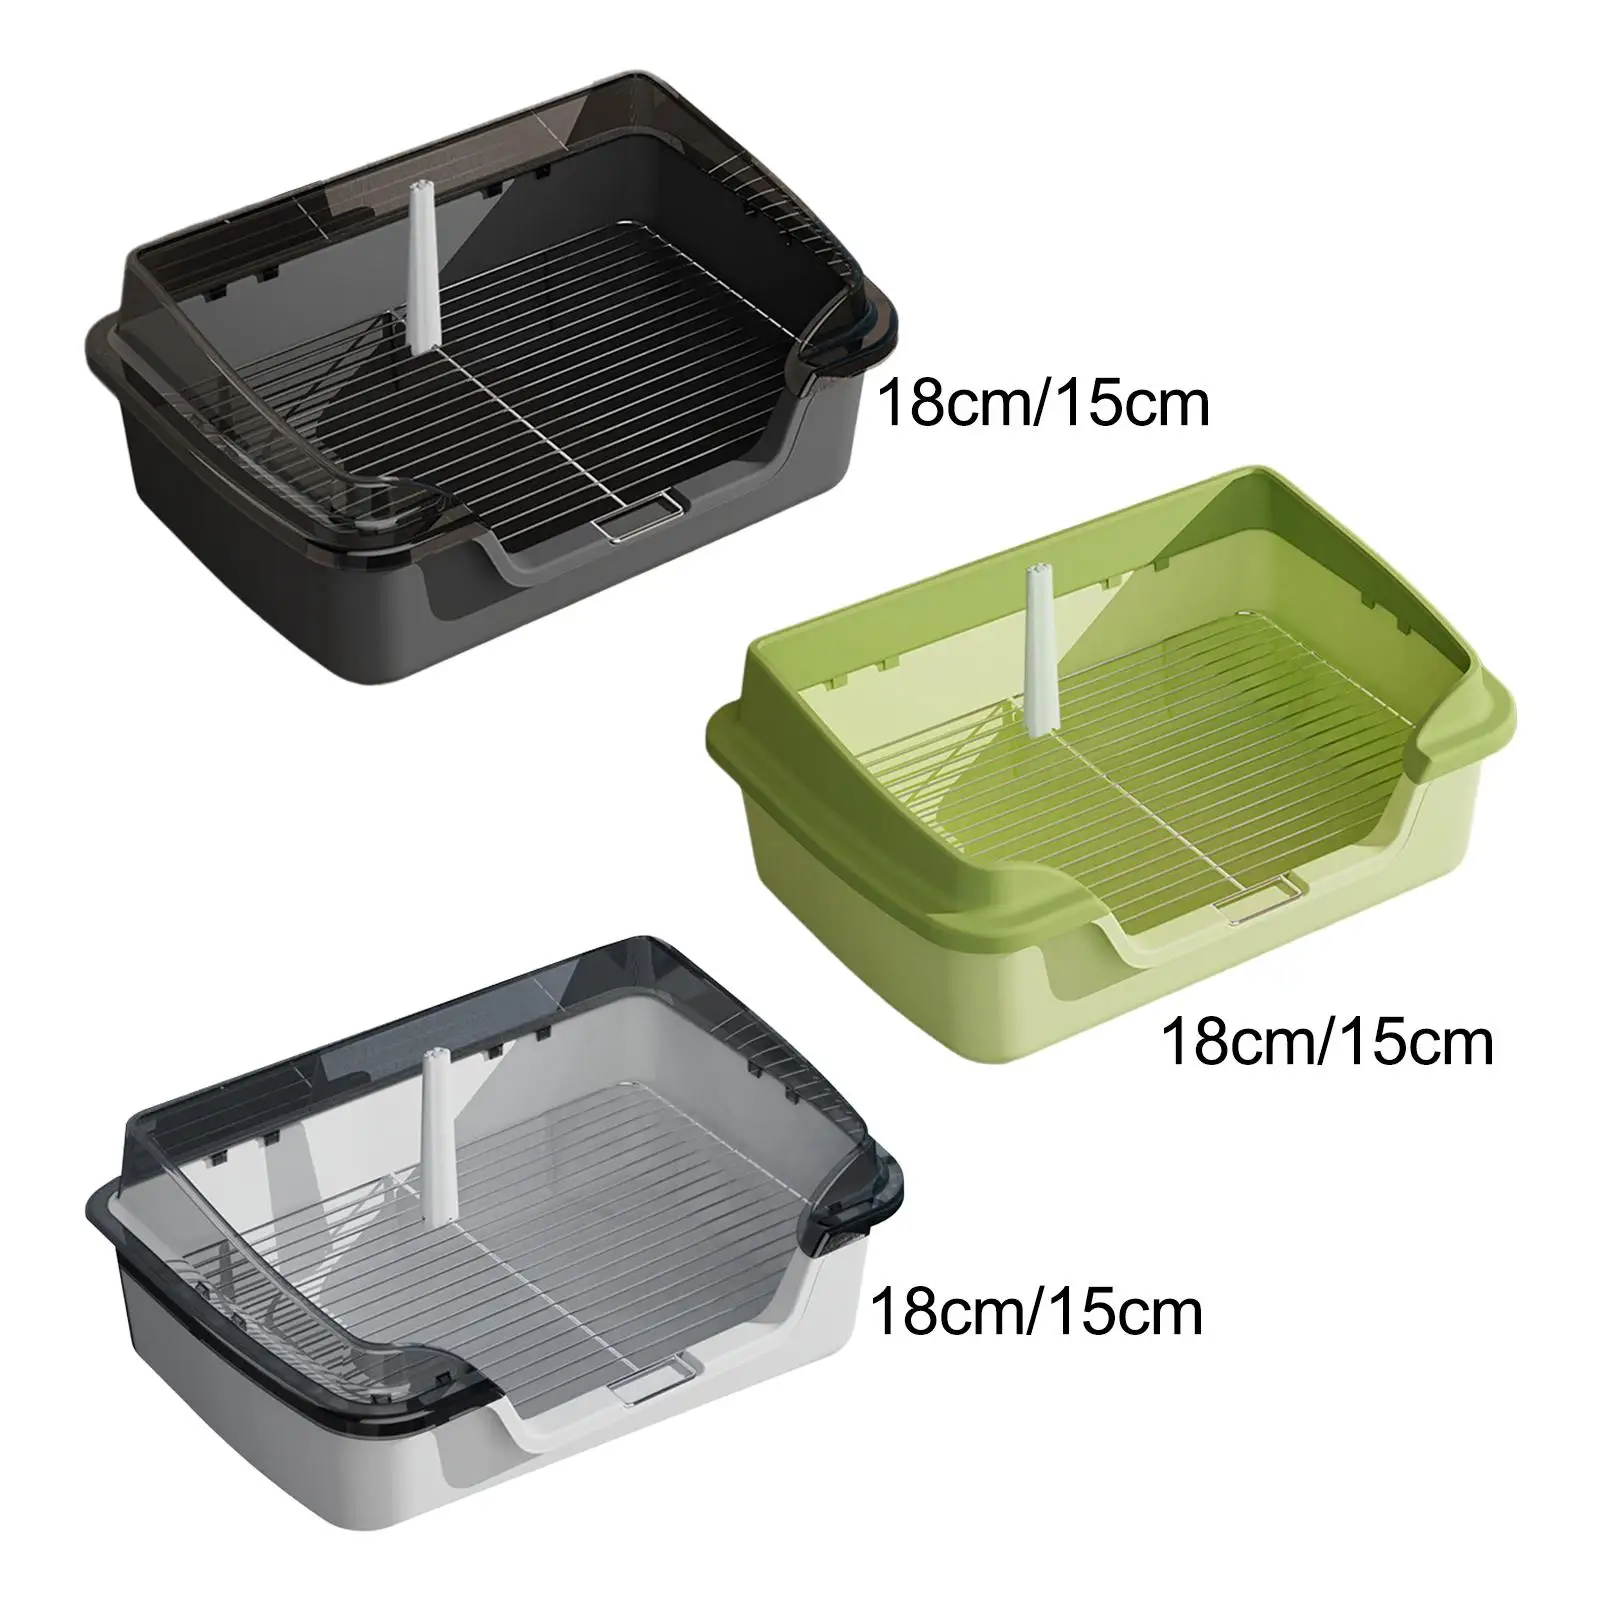 Pets Litter Box Pans Homes Easy Clean Loo Training Pads Toilet Dog Toilet Training Potty Tray for Puppy Small Medium Large Dog